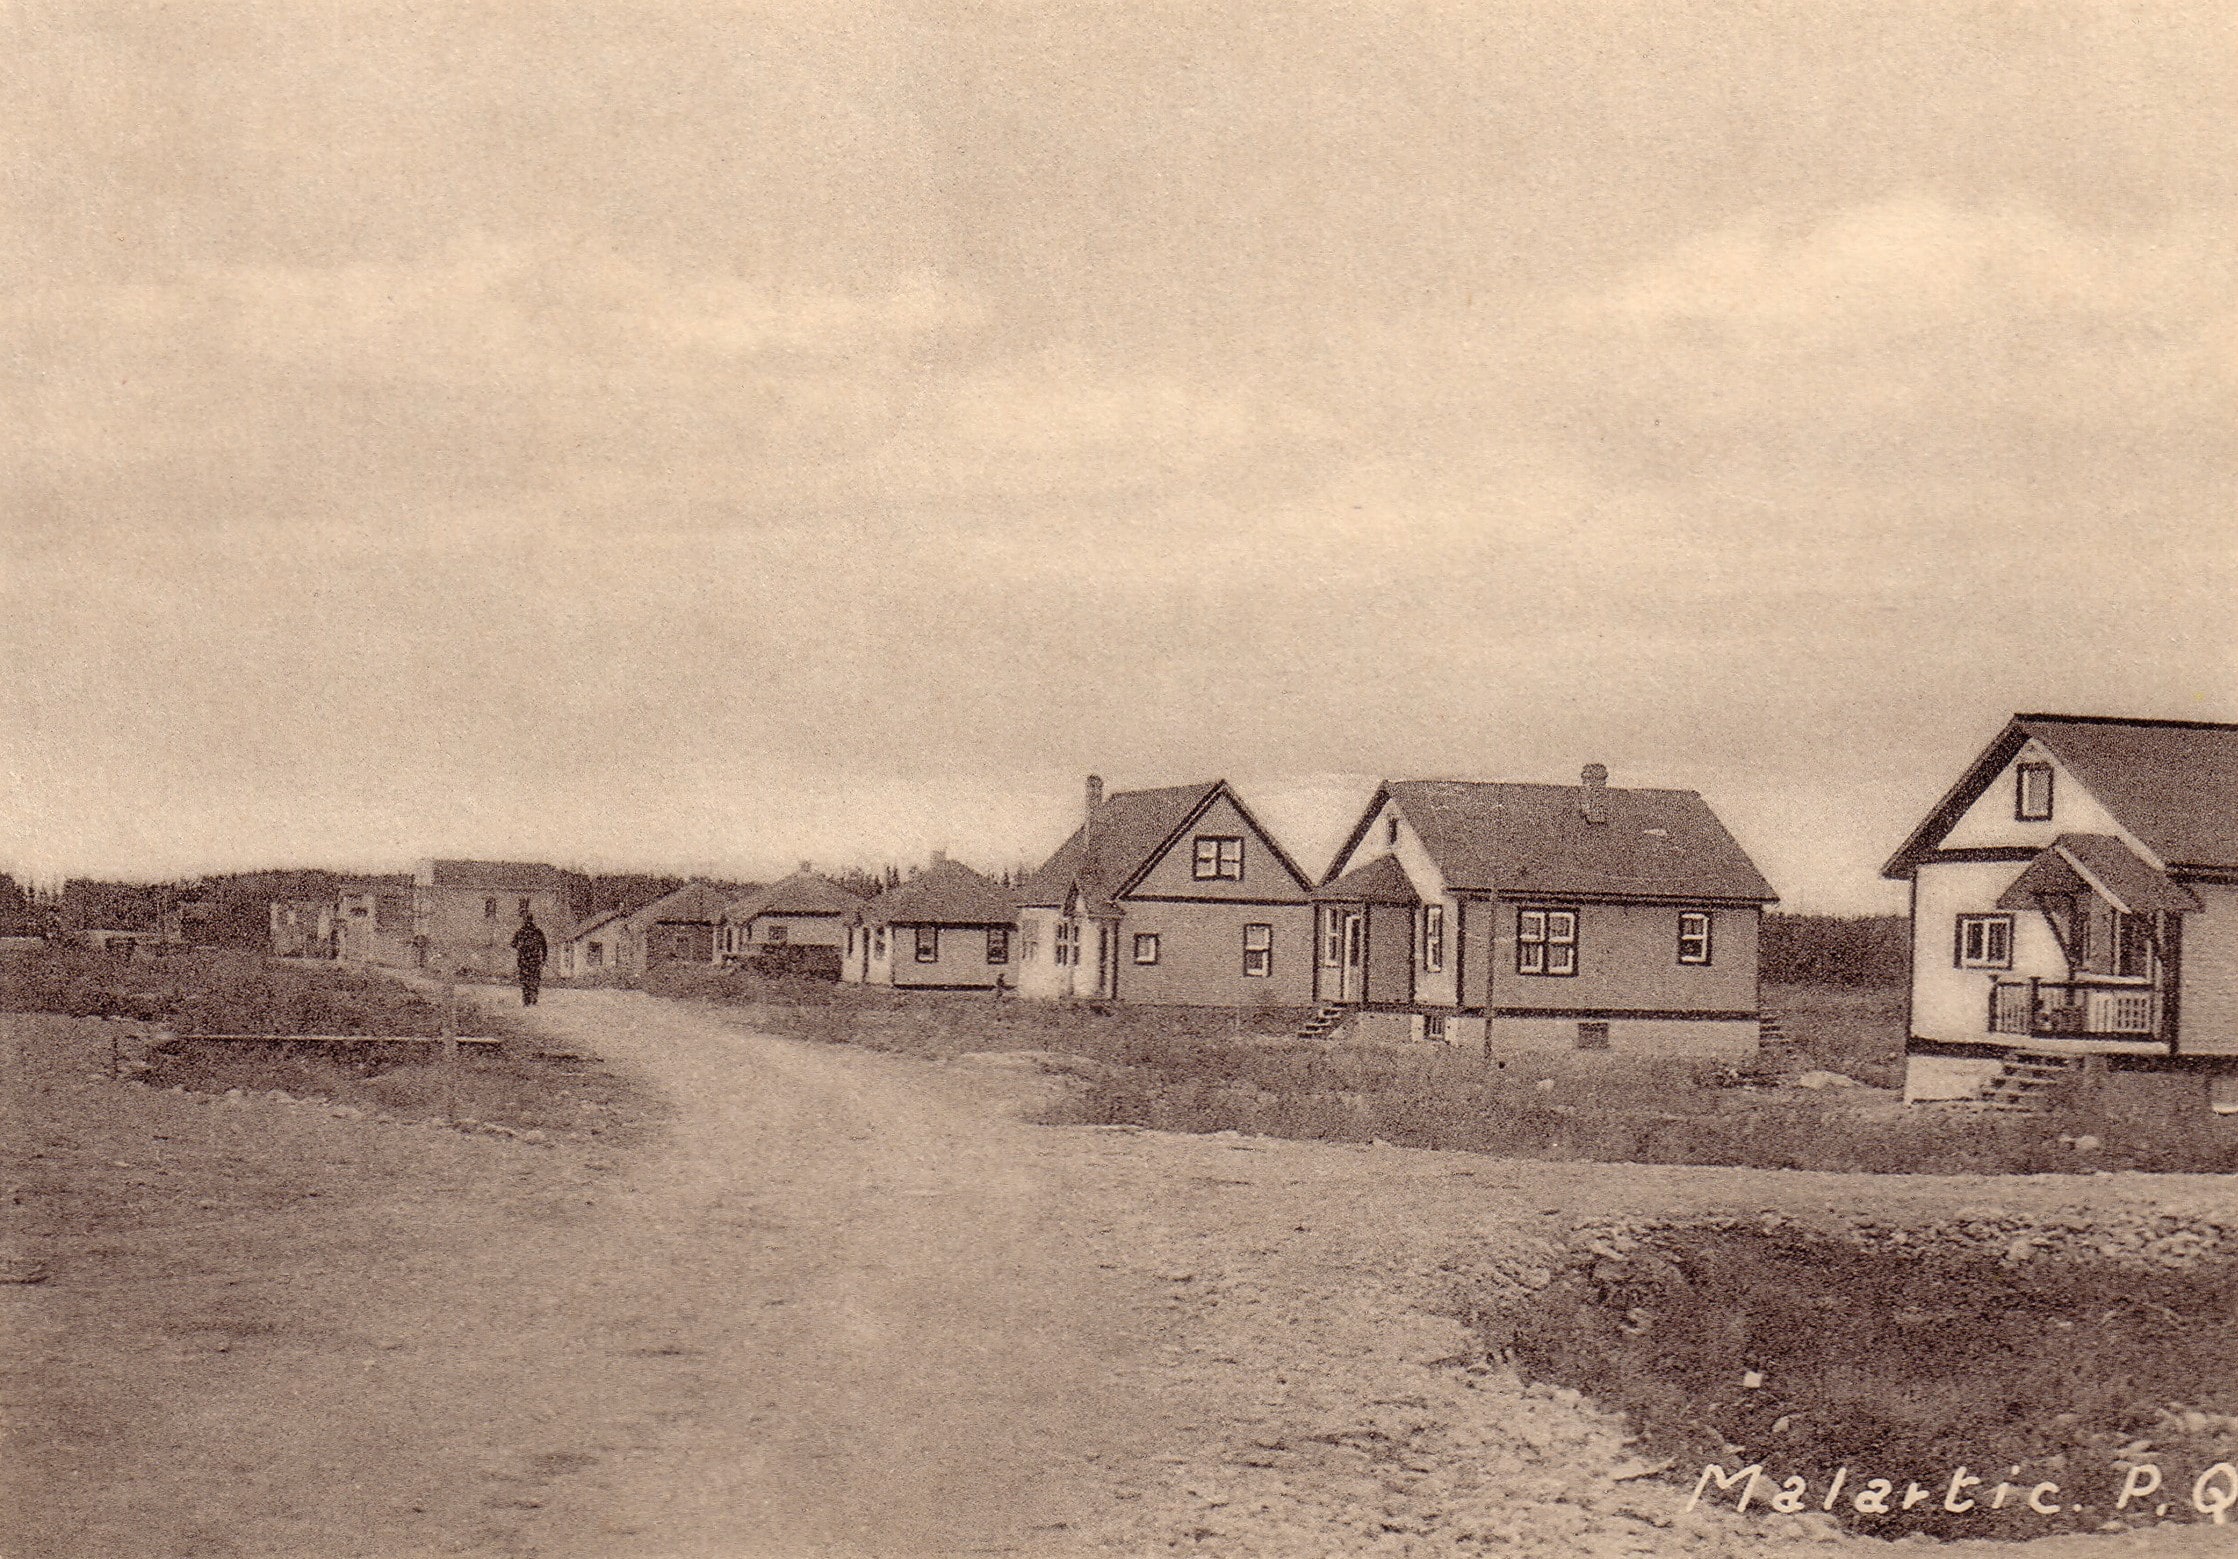 Sepia photograph of several residences lined up on one side of an unpaved street. In the centre, a man is walking. The inscription at the bottom right reads, "Malartic. P. Q.".